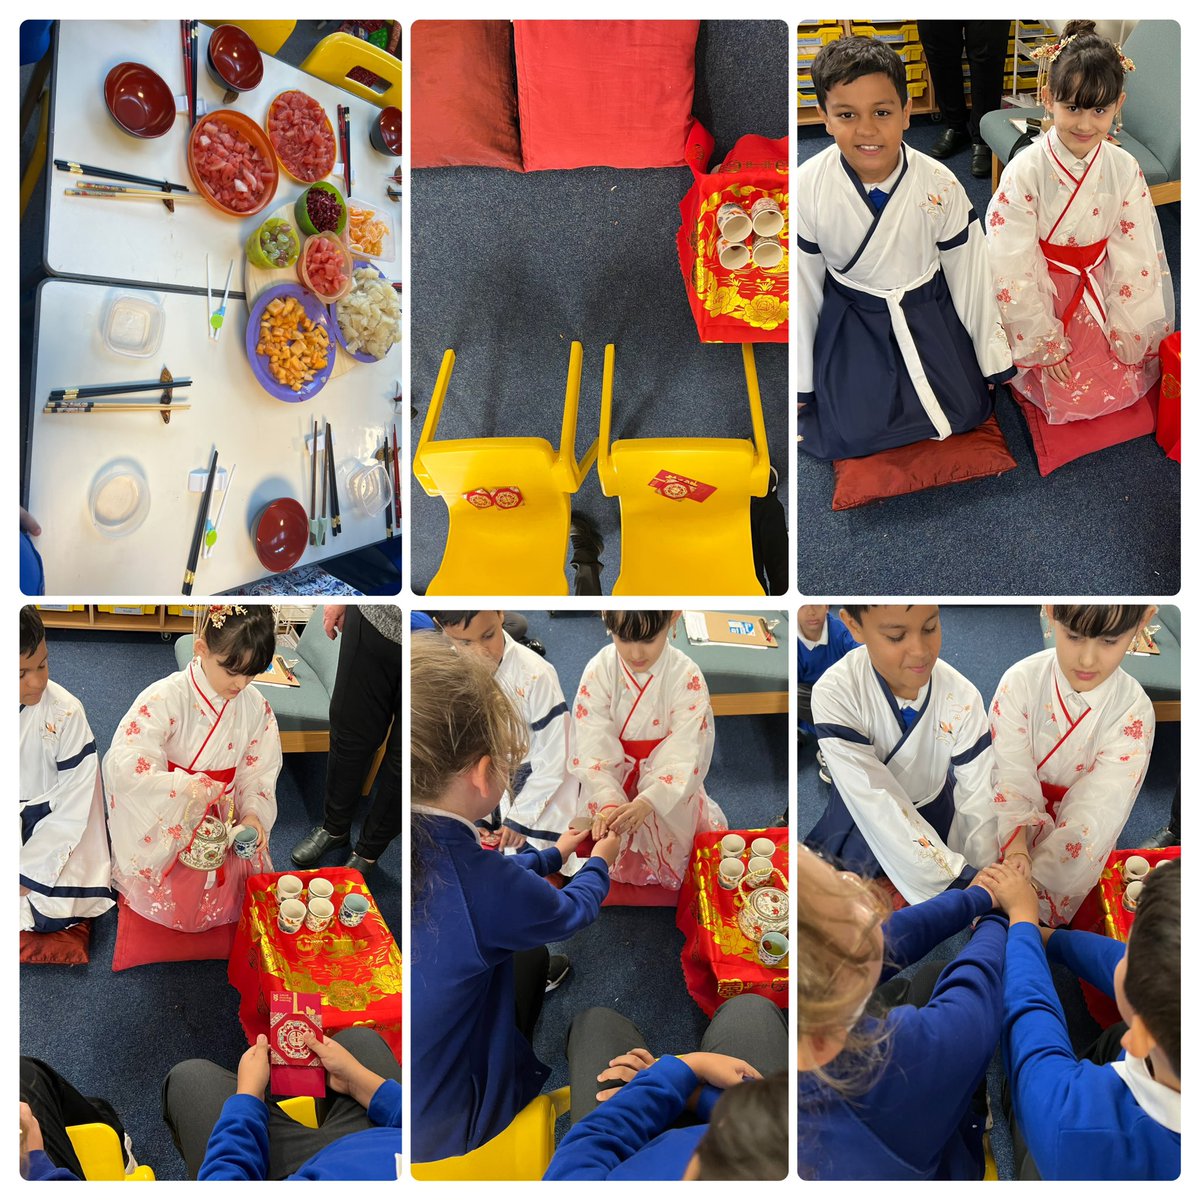 We have been lucky enough to have Mrs Mizon show us how a traditional Chinese wedding is celebrated. We role-played the tea ceremony and wore traditional Chinese wedding clothes 🇨🇳🥢🧧 #Team34WO #Team4N #Ethicalinformedcitizens